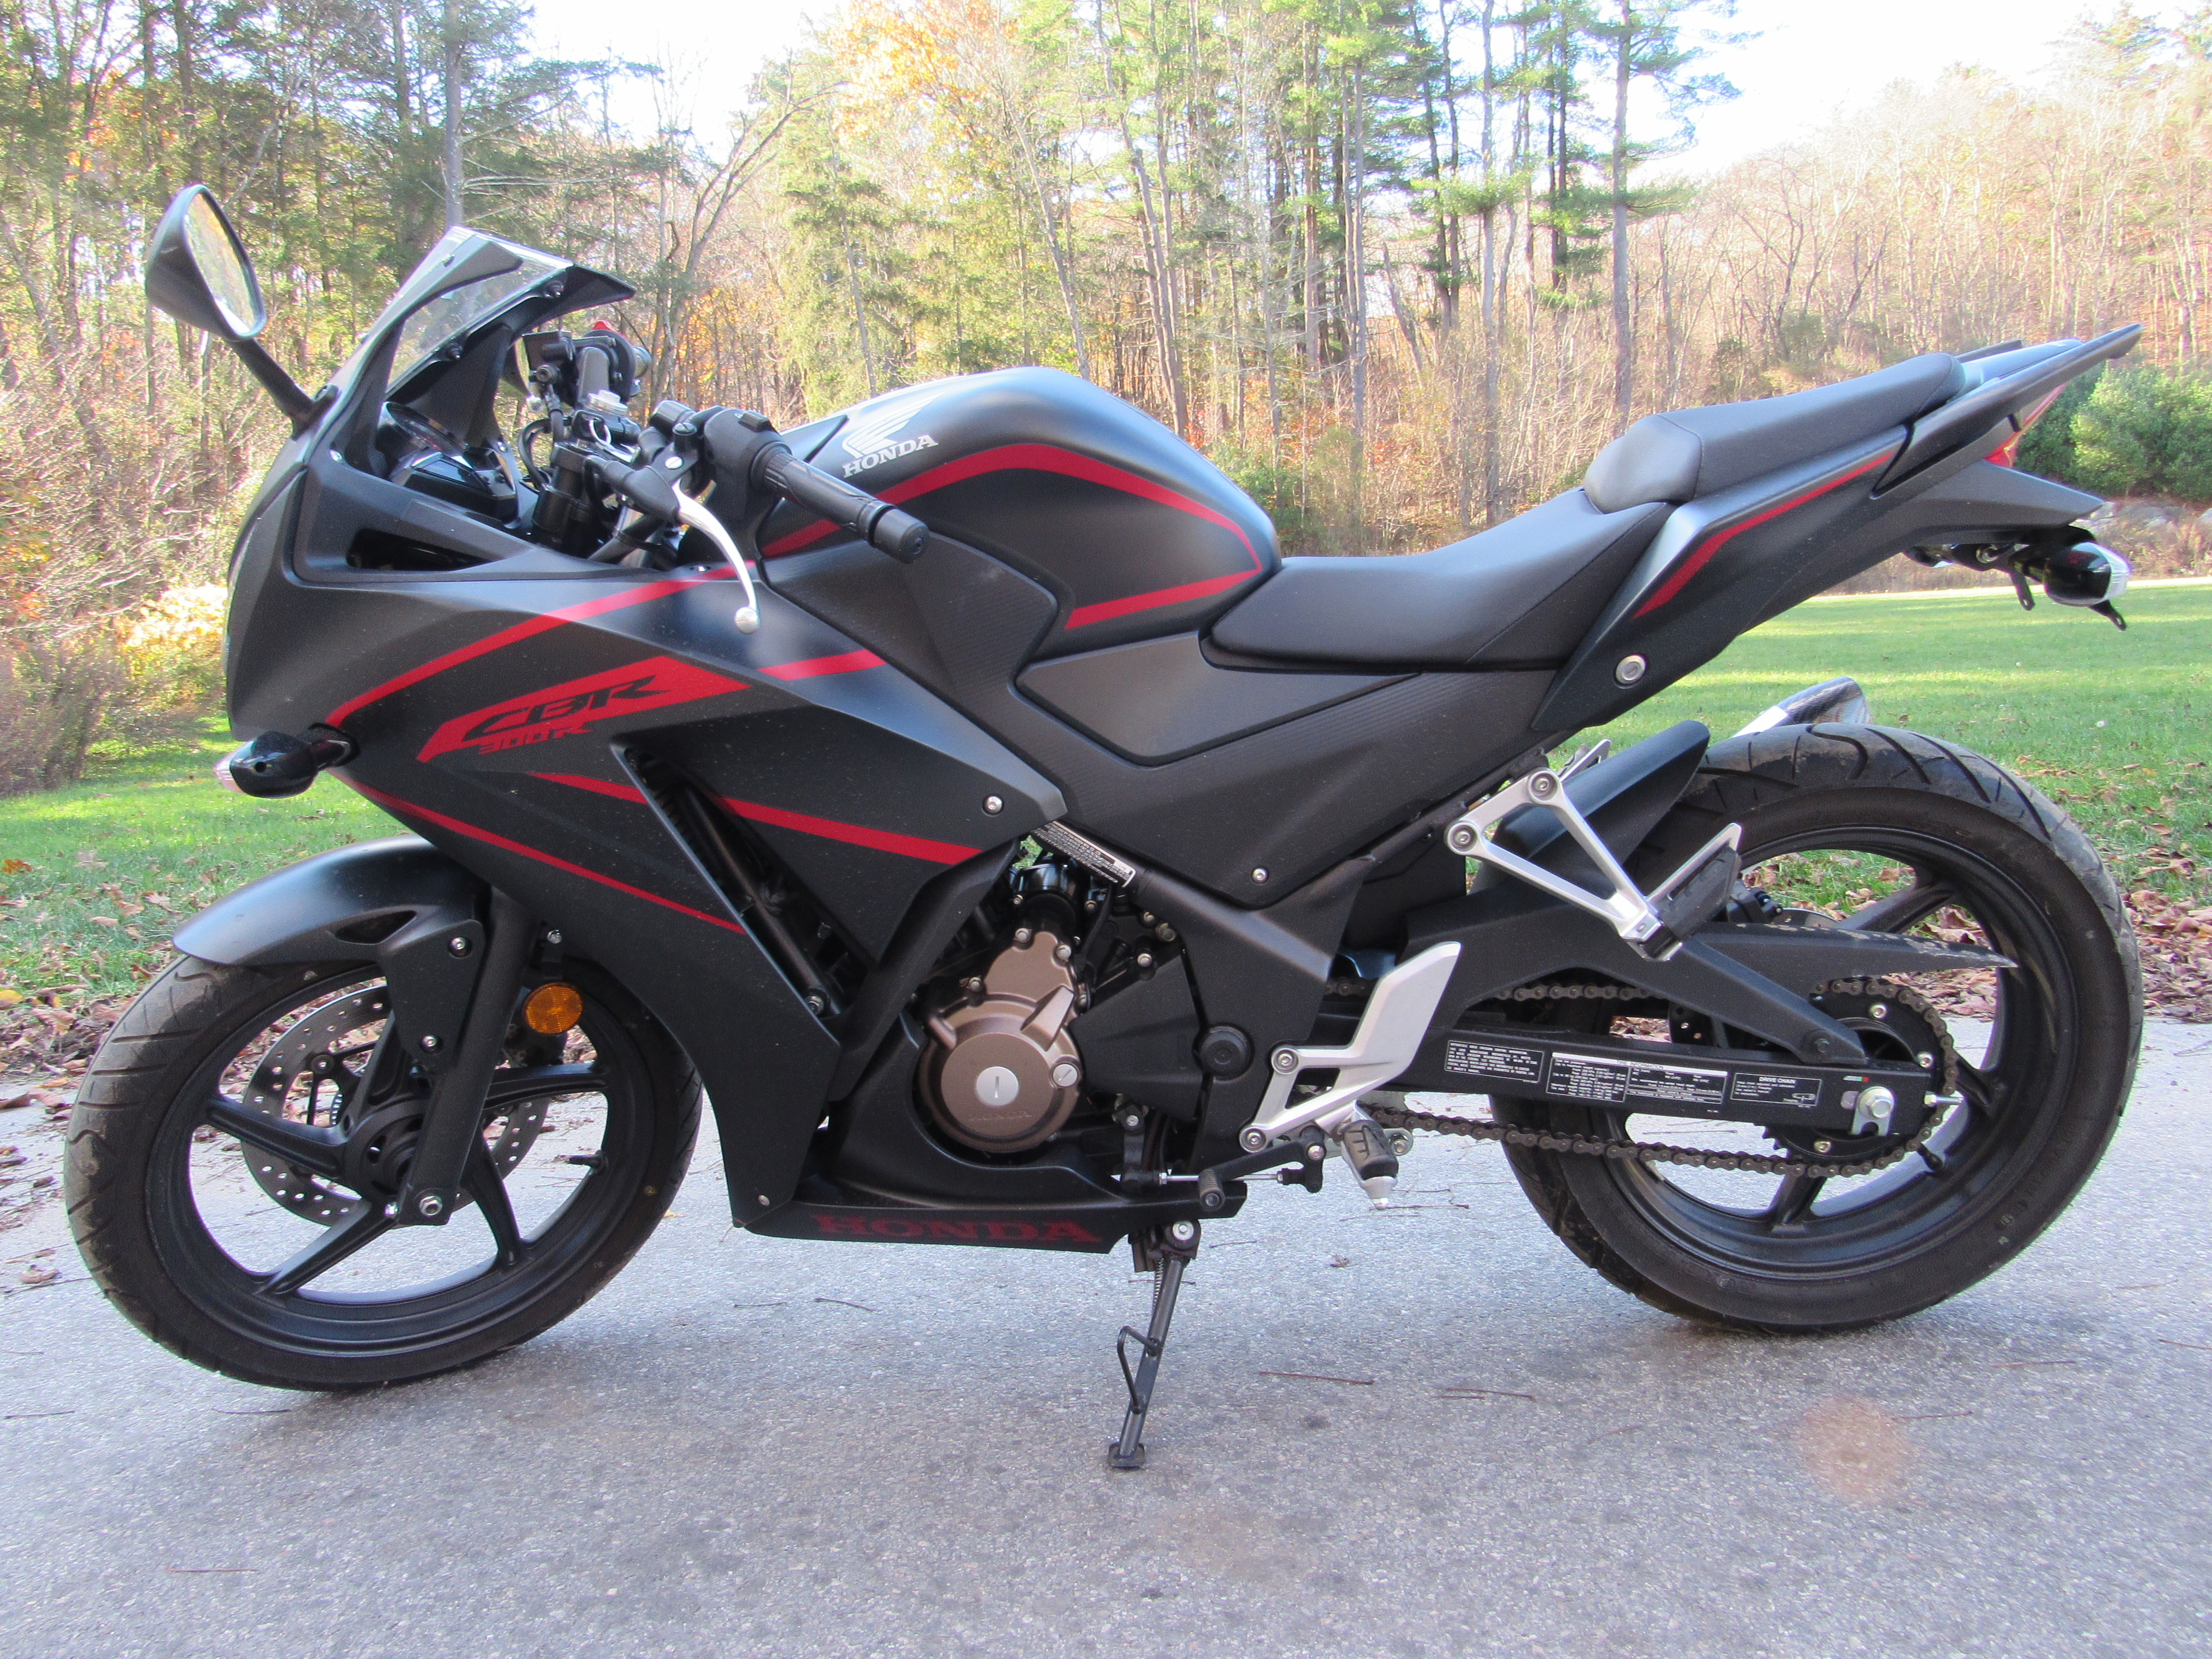 2019 CBR 300R LIKE NEW WITH 1,312 MILES CBR 300R LIKE NEW WITH 1,312 MILES 0177 - Click for larger photo